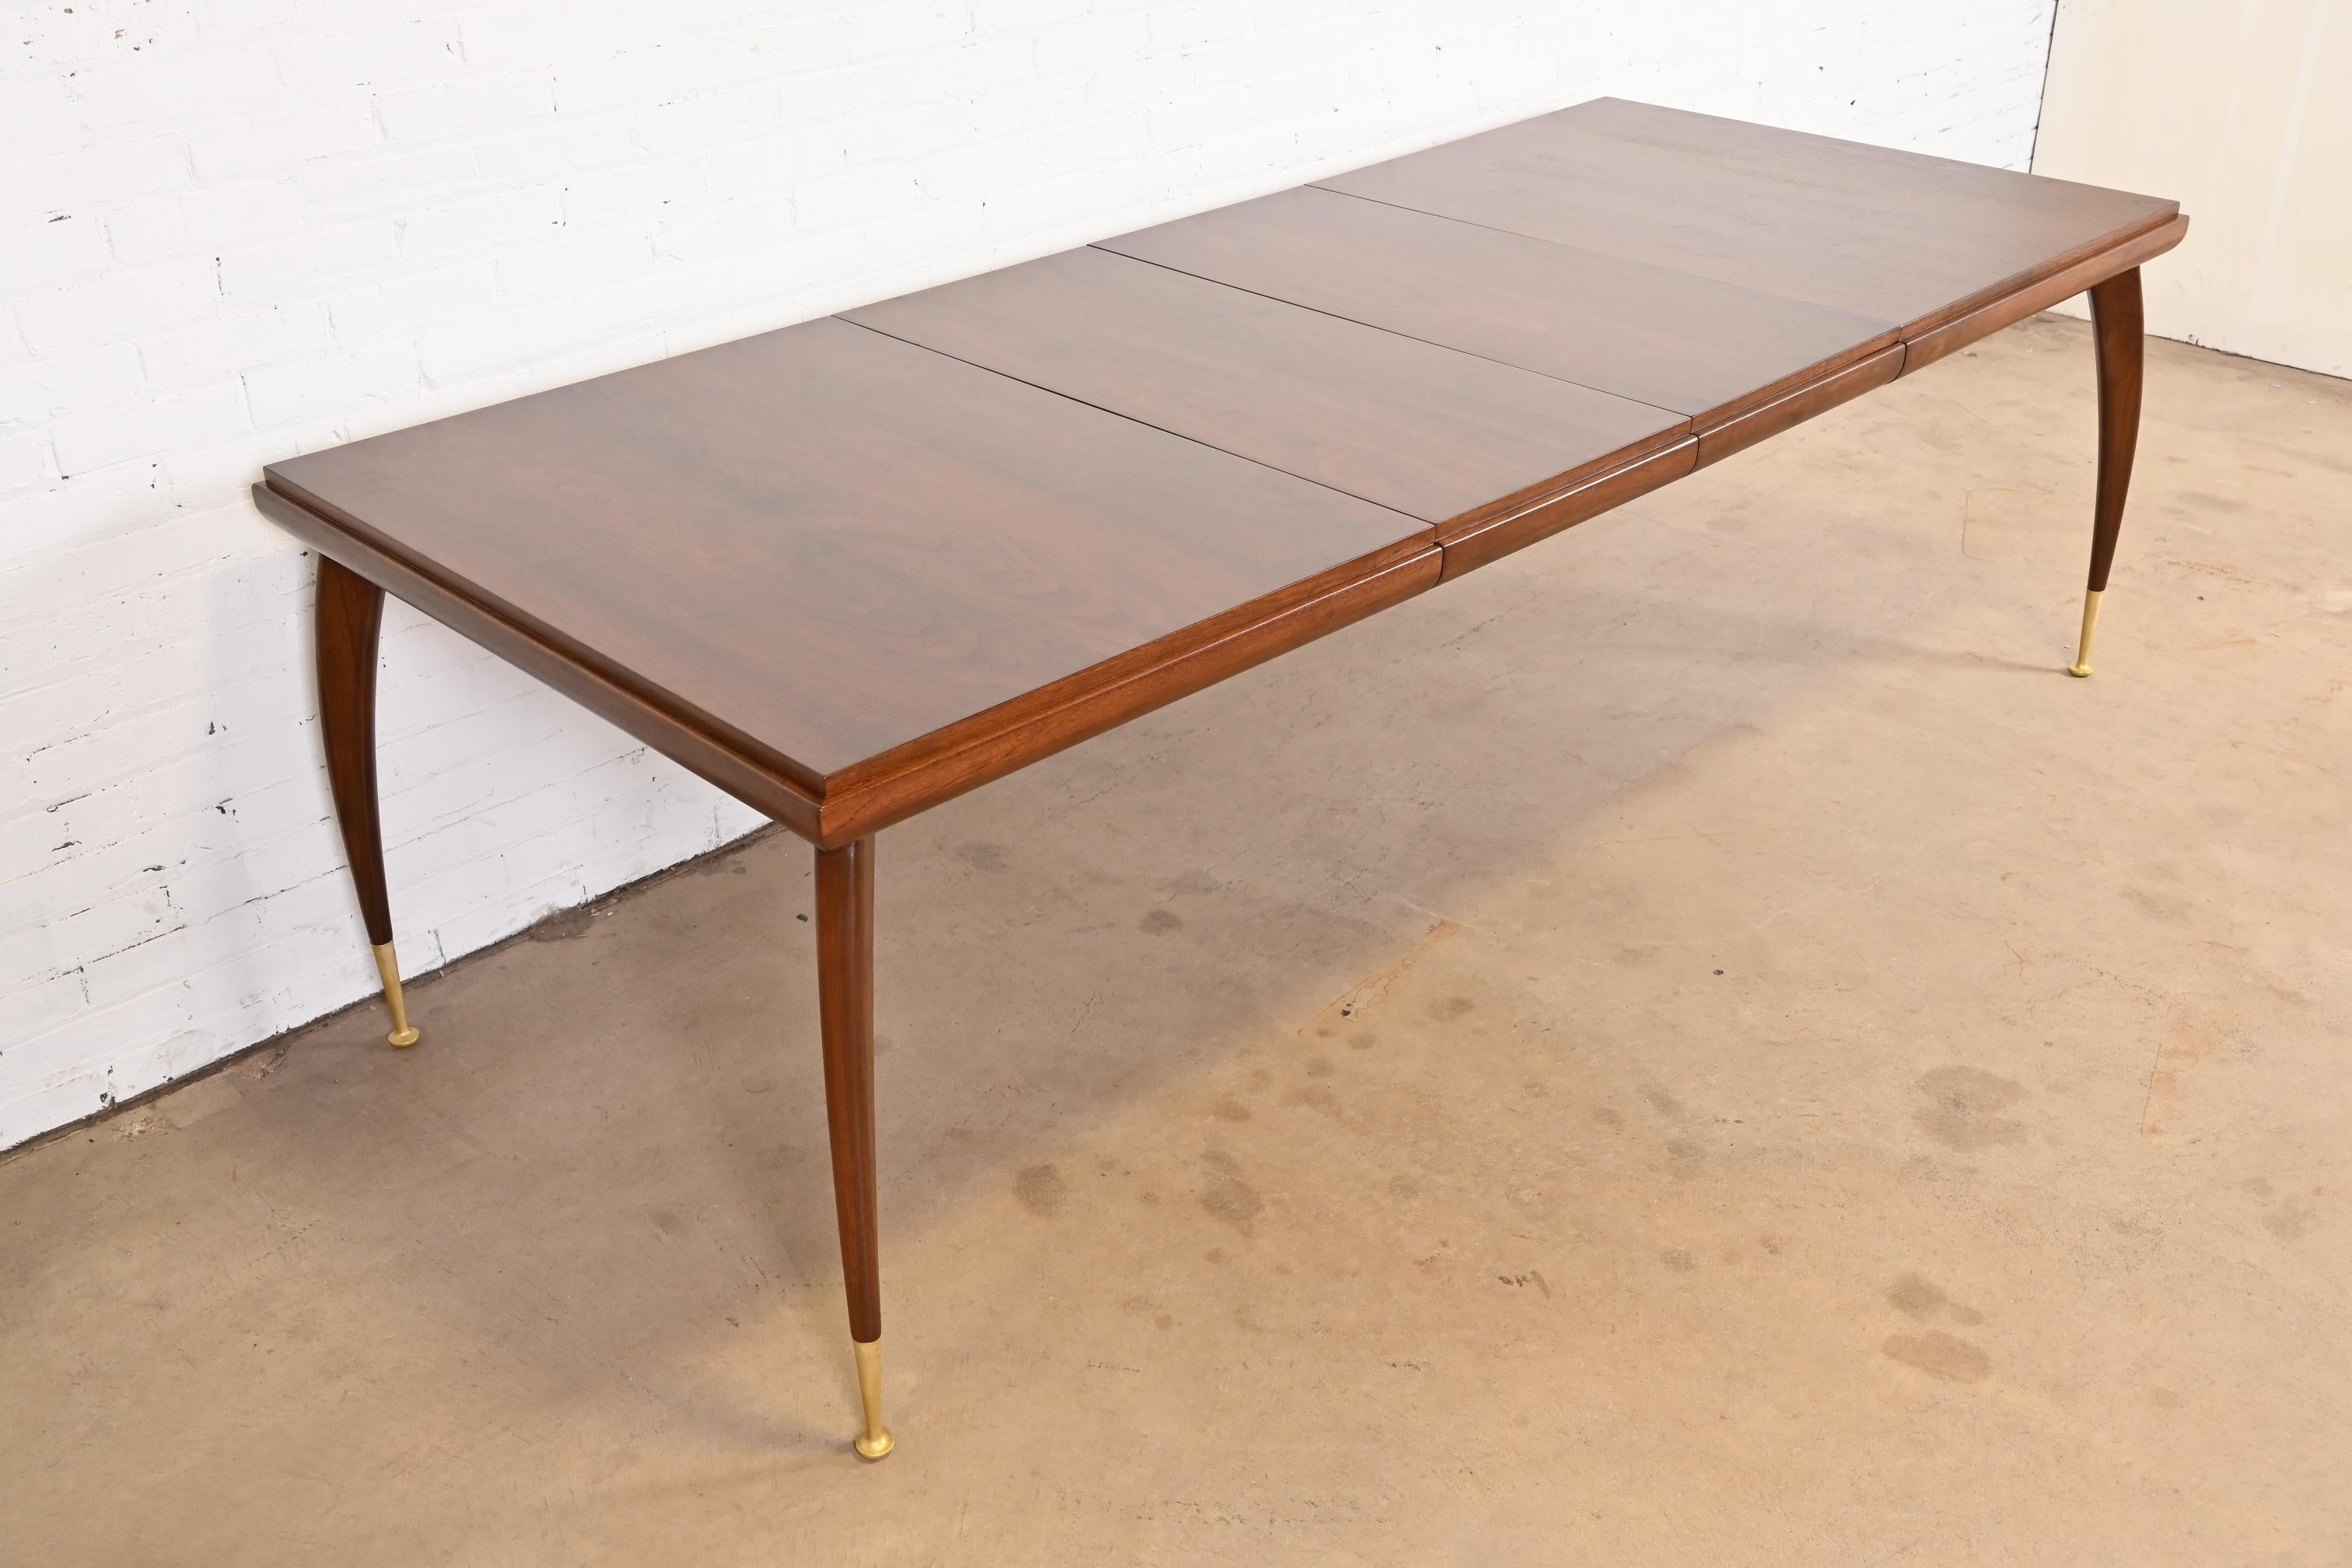 Gio Ponti Style Mid-Century Modern Walnut Extension Dining Table, Refinished 1